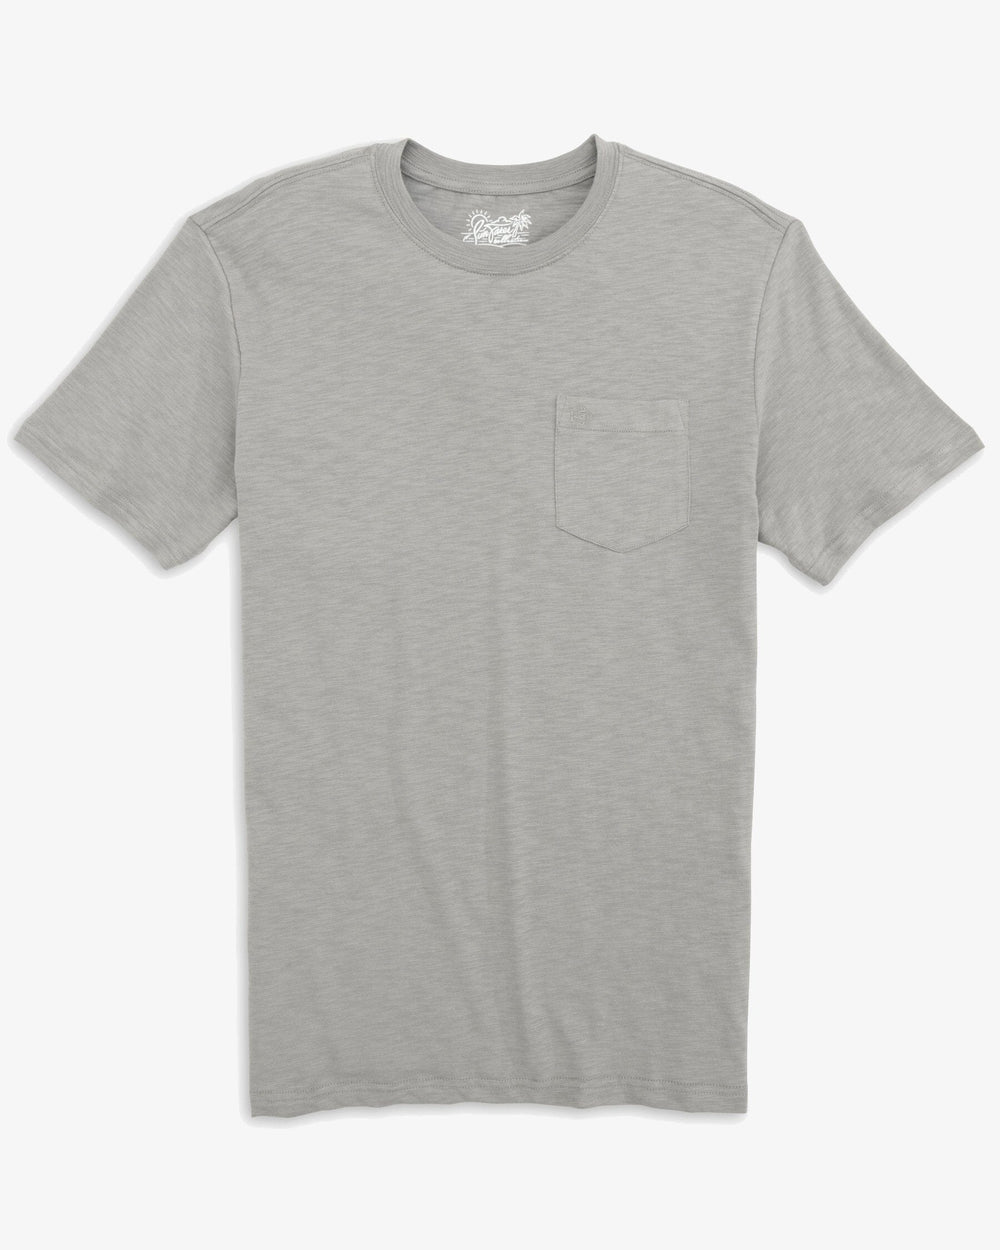 The front of the Men's Sun Farer Short Sleeve T-Shirt by Southern Tide - Steel Grey